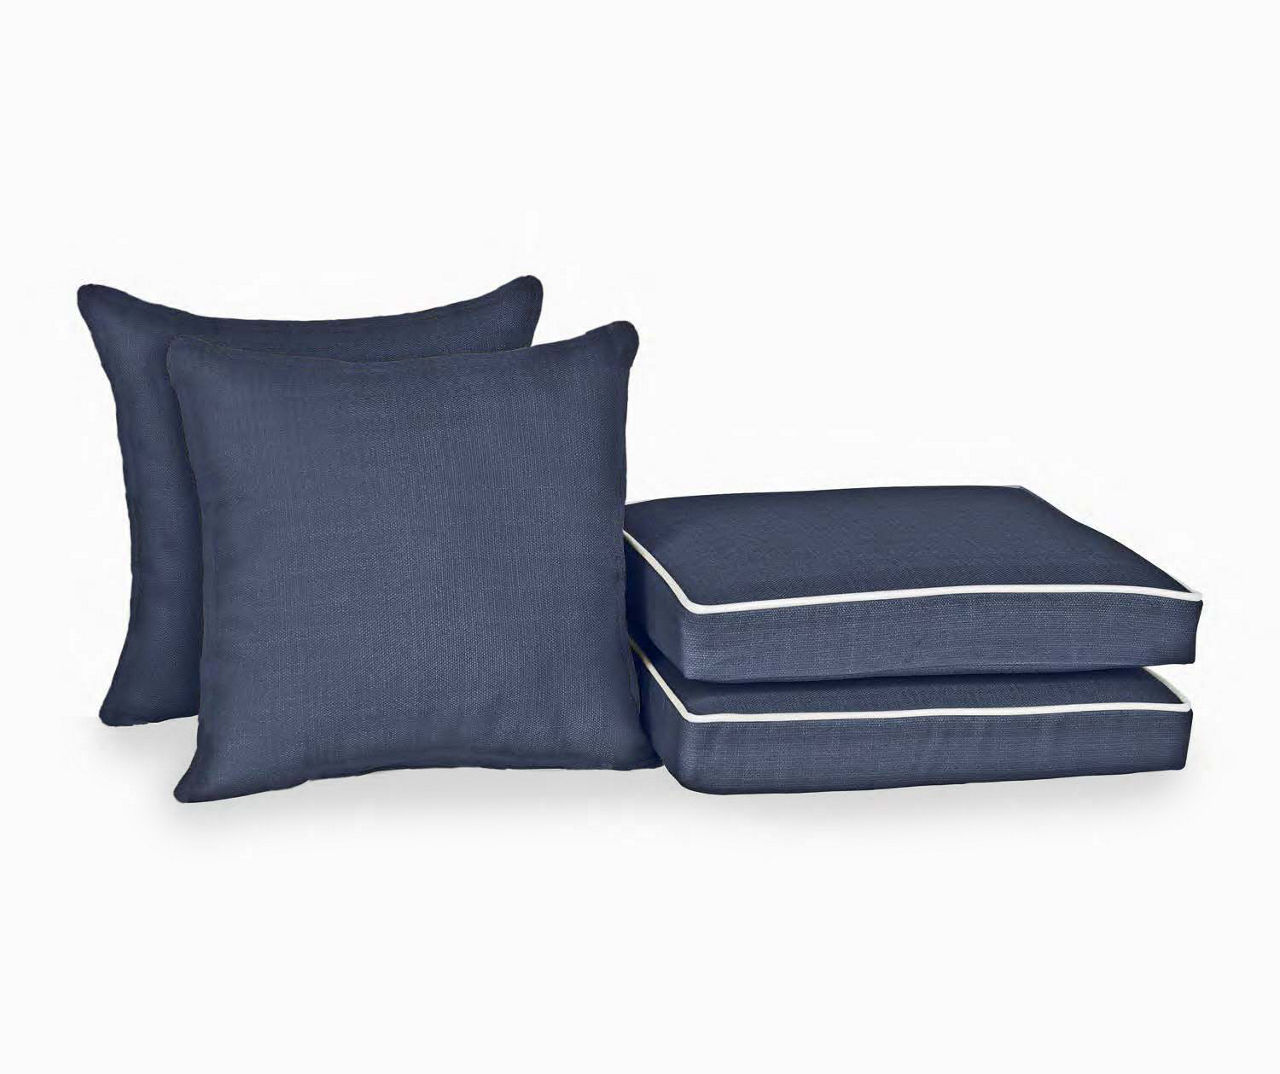 Lakeshore Giant Comfy Pillows - Set of 4 Colors